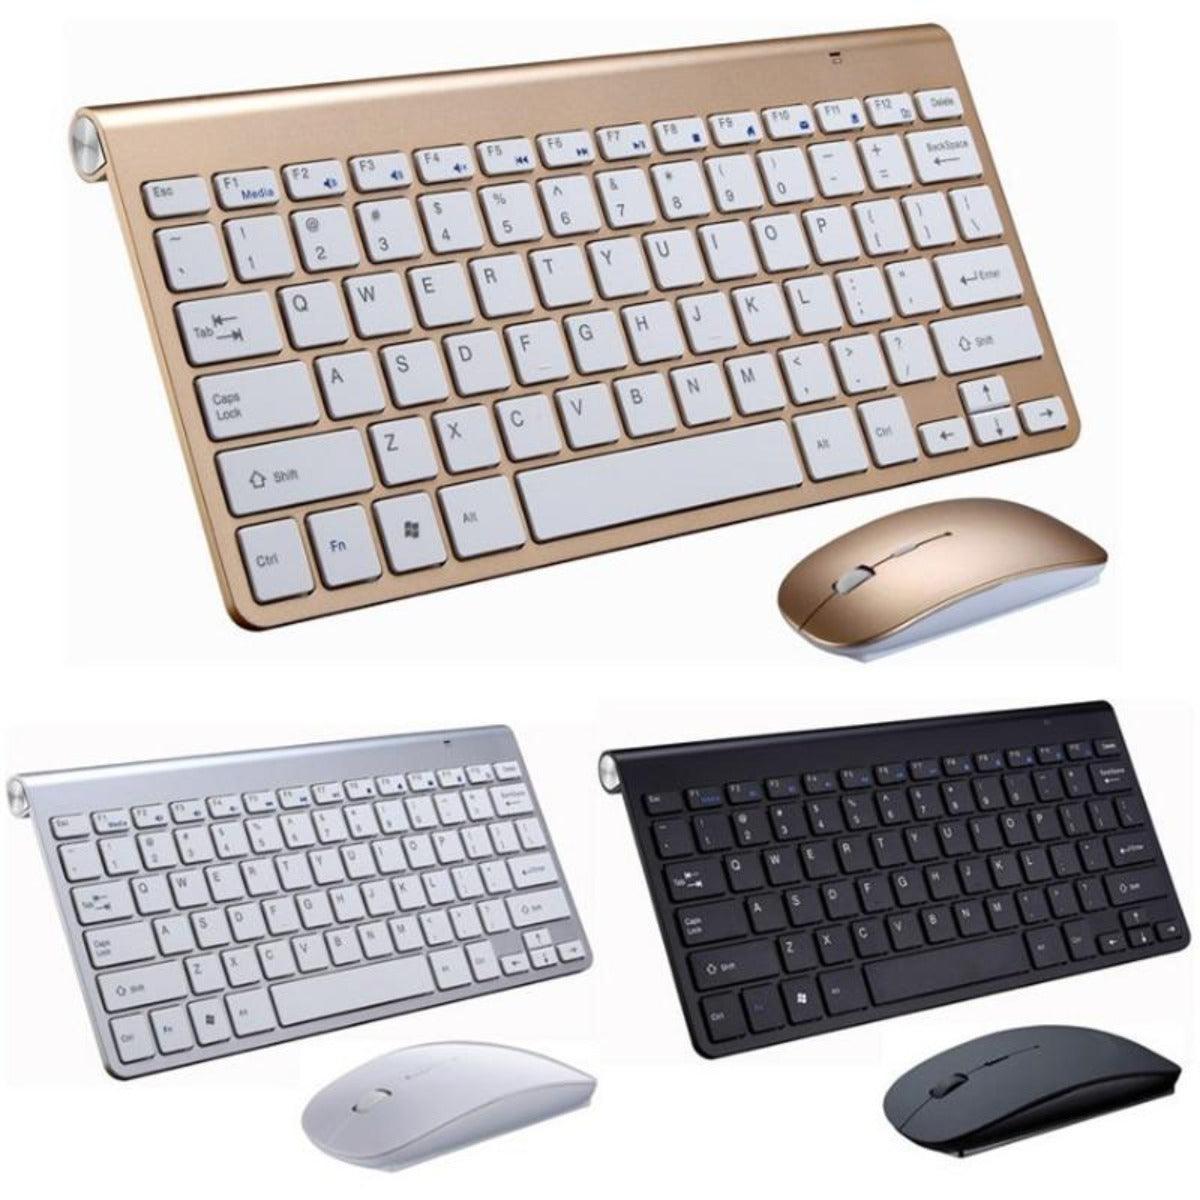 2.4 GHz Wireless Keyboard and Mouse Set — Best